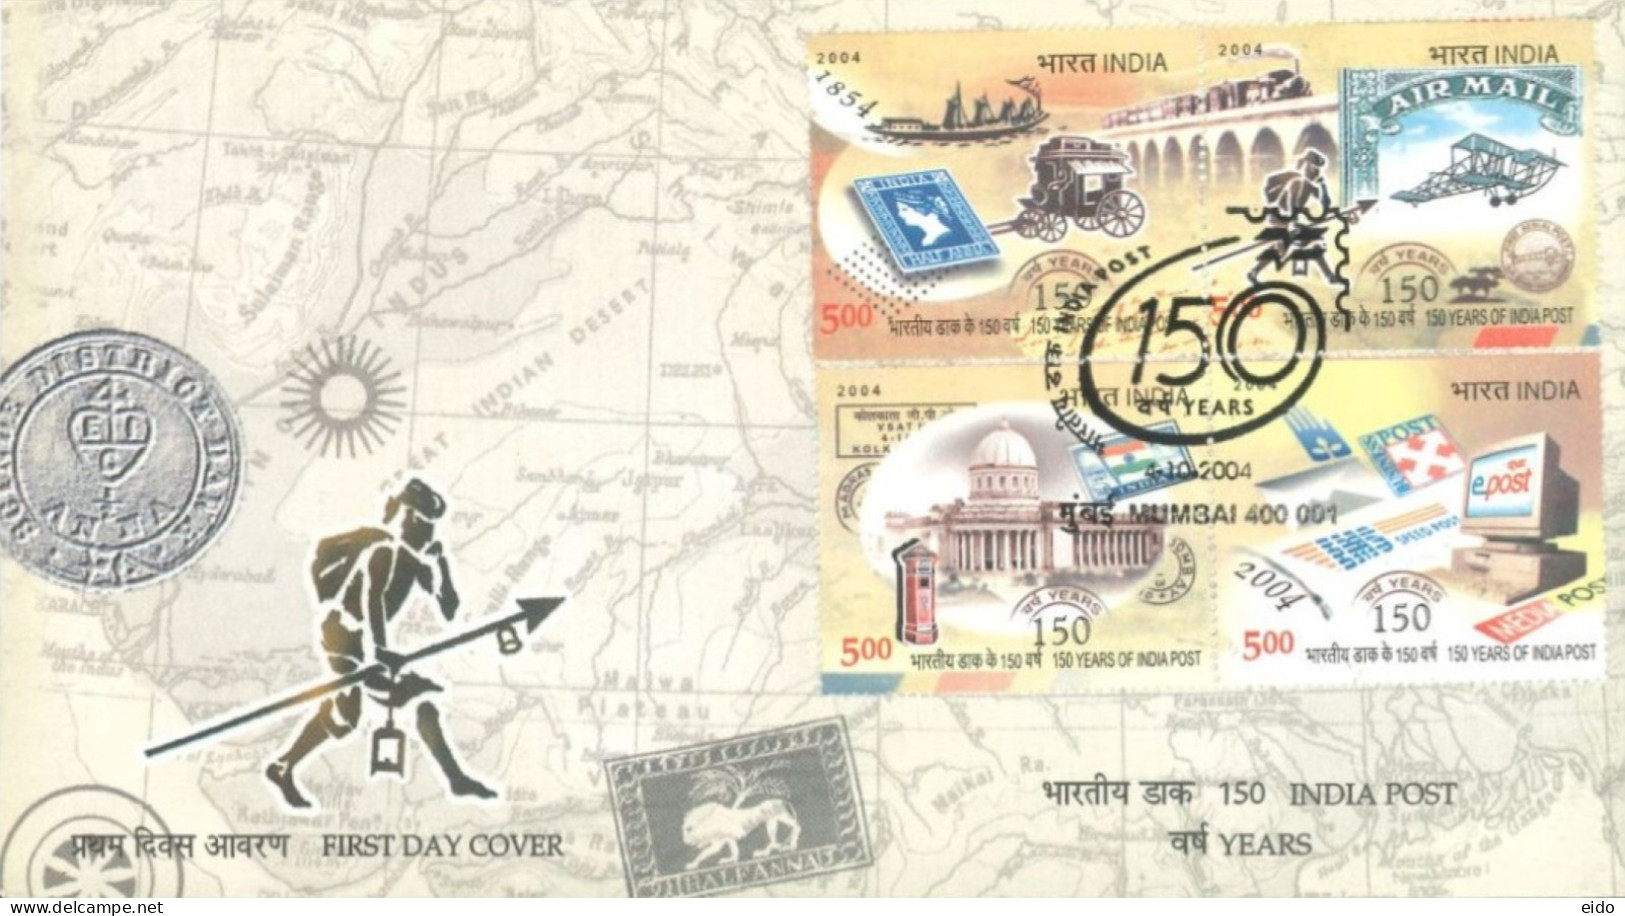 INDIA - 2004 - FDC STAMPS OF 150th ANNIVERSARY OF INDIA POST. - Covers & Documents